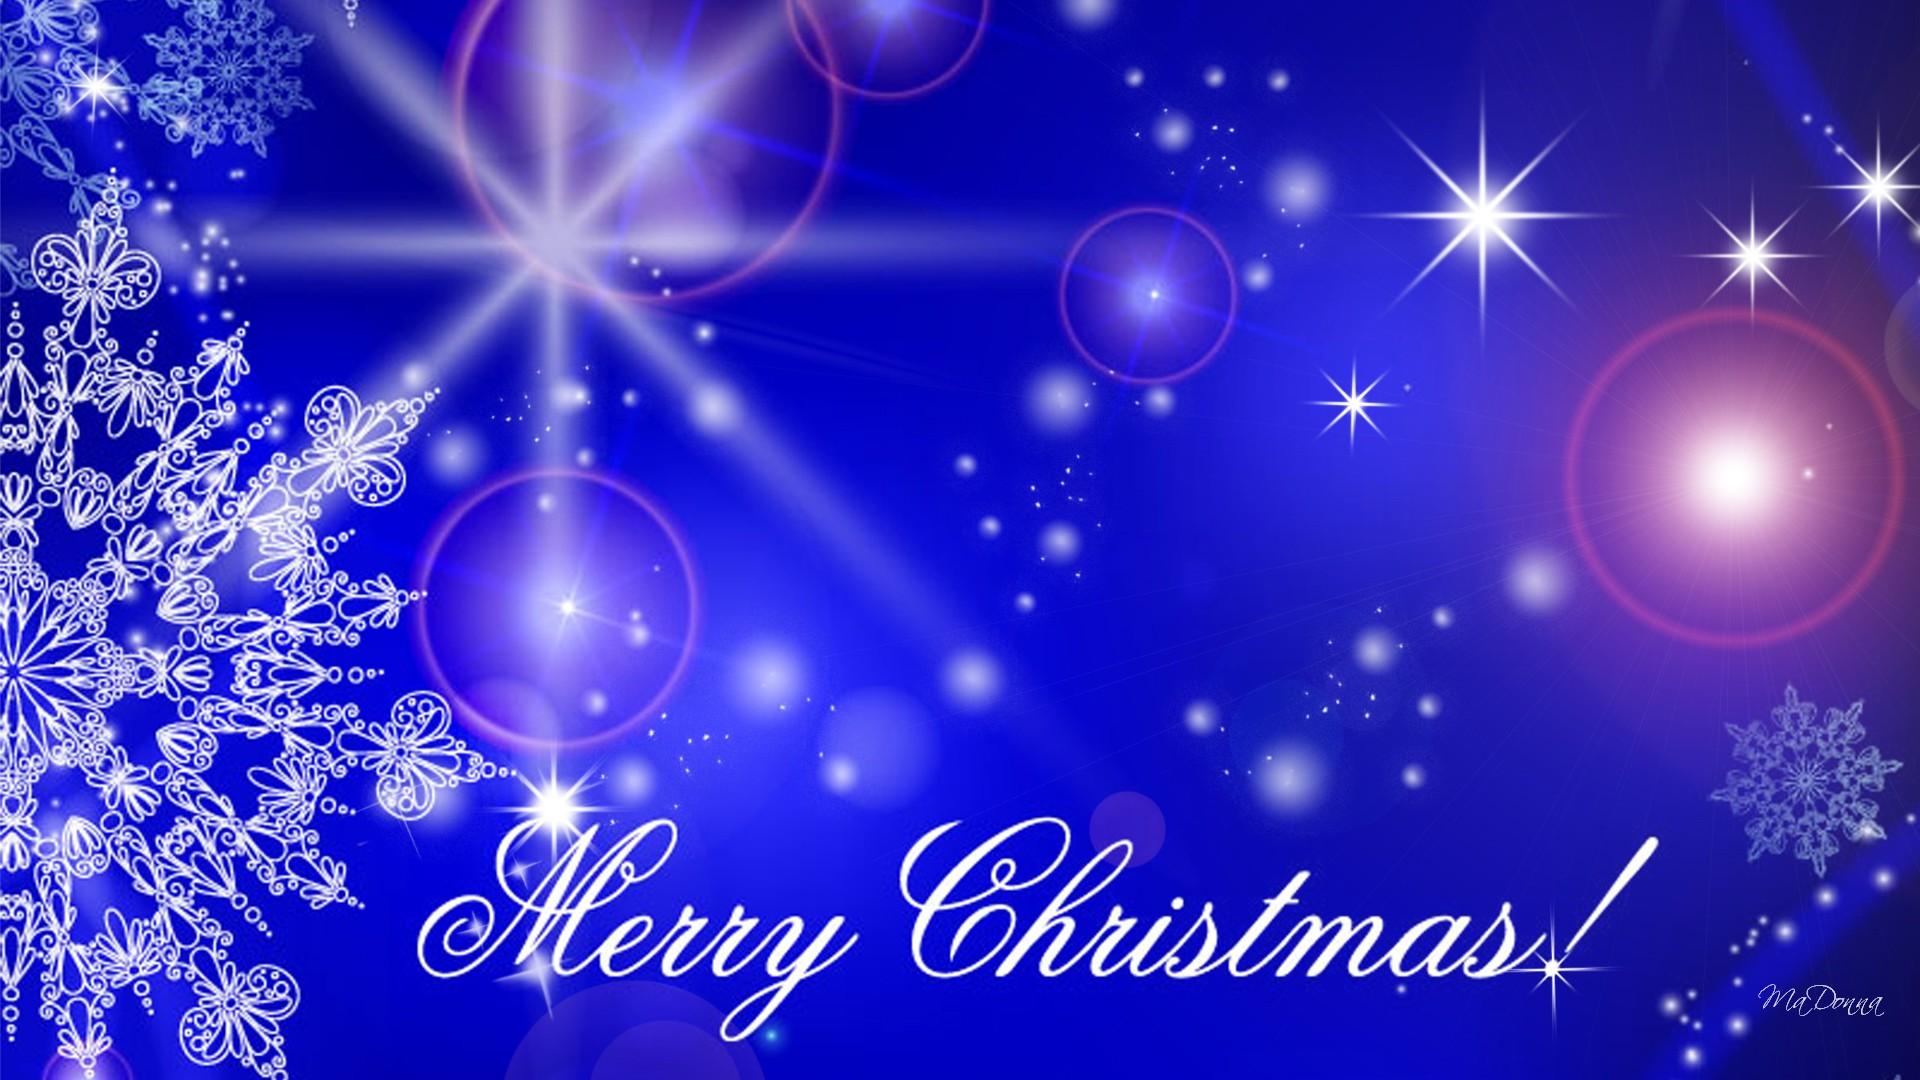 Christmas Backgrounds Wallpapers